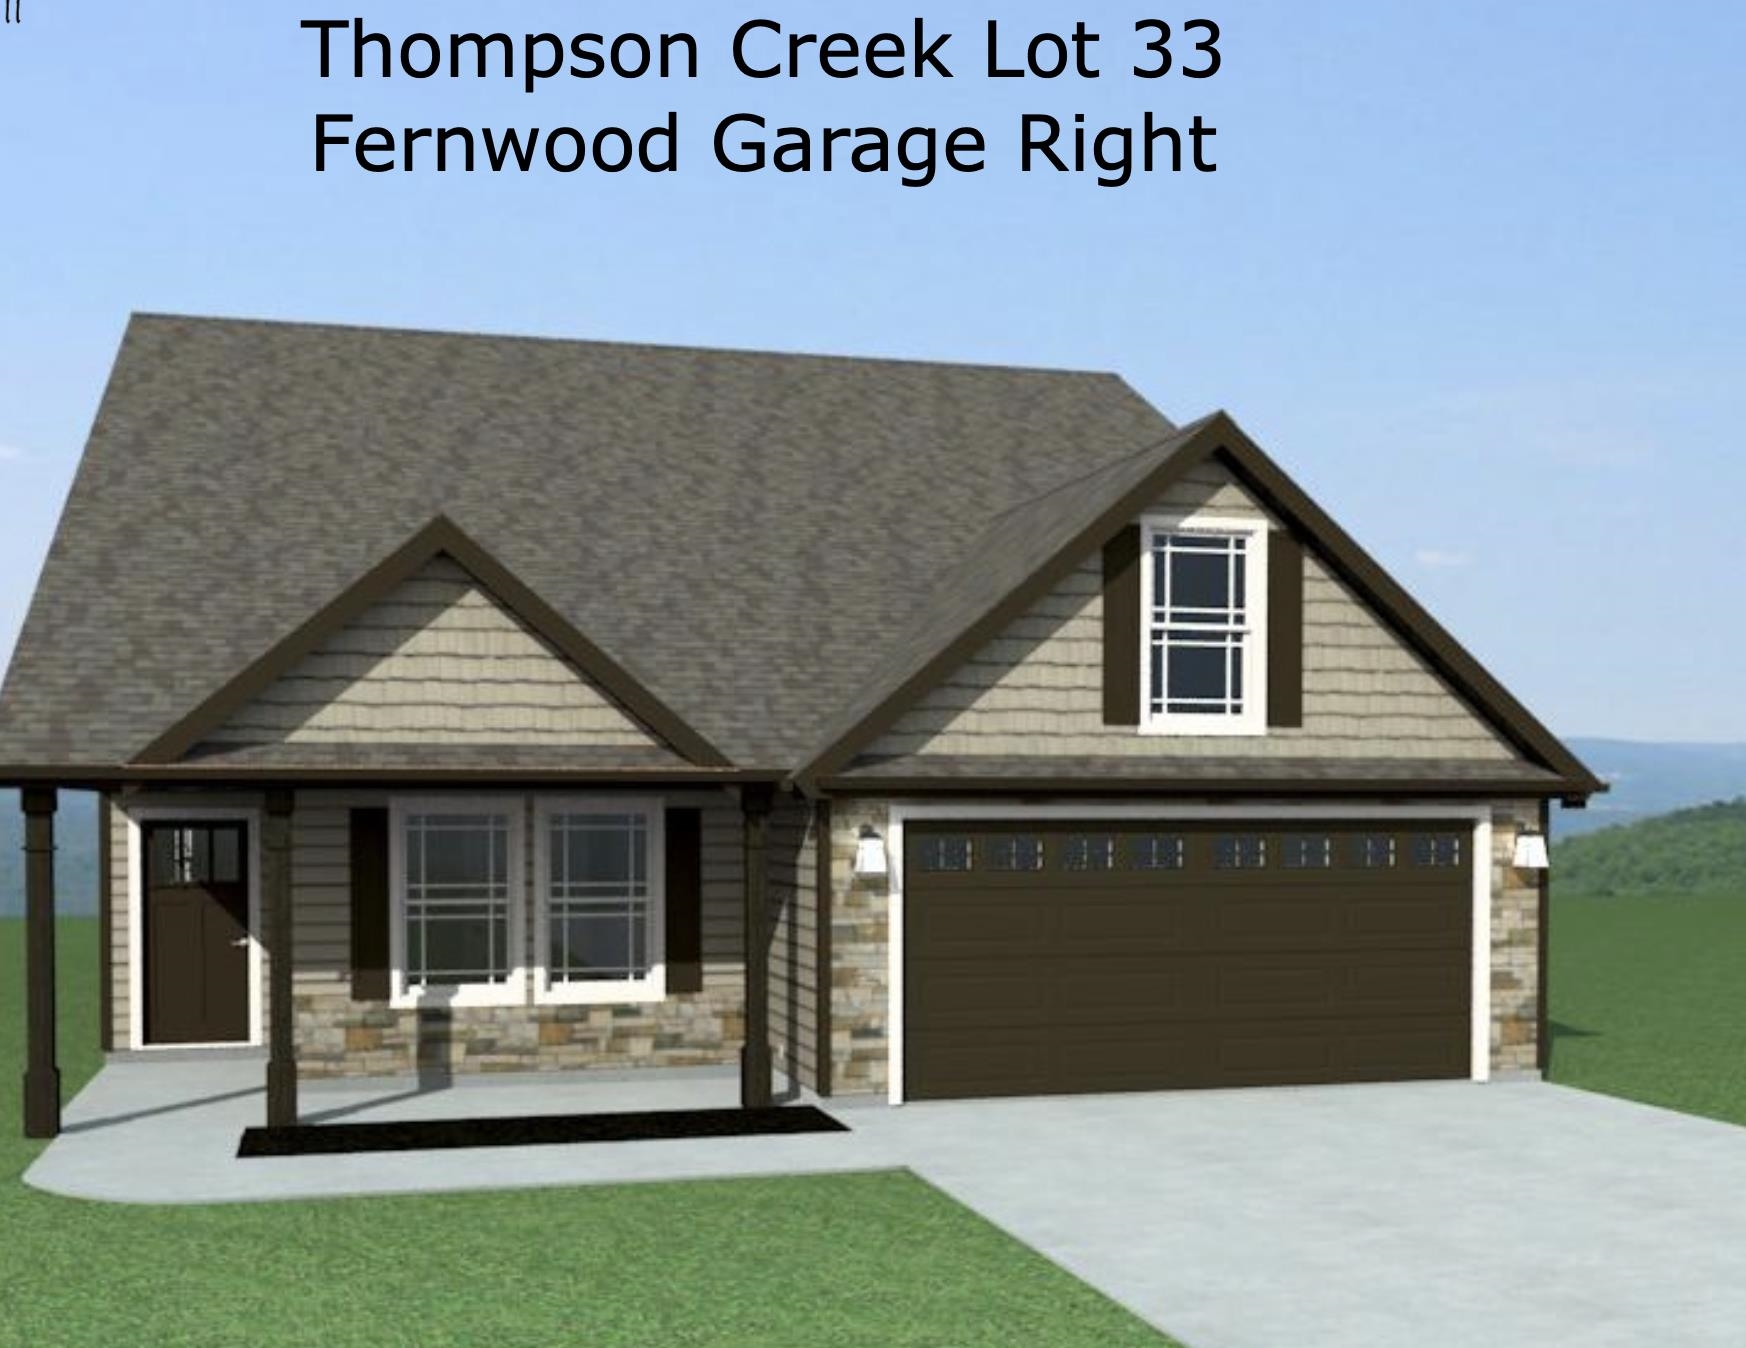 The Fernwood plan offers a beautiful, modern layout.  Kitchen/Dining open to living area. Home complete with the trademark chair rail, crown molding, and rope lighting. Preferred Lender/Attorney Closing Costs Incentive Offered!  LOT 34.